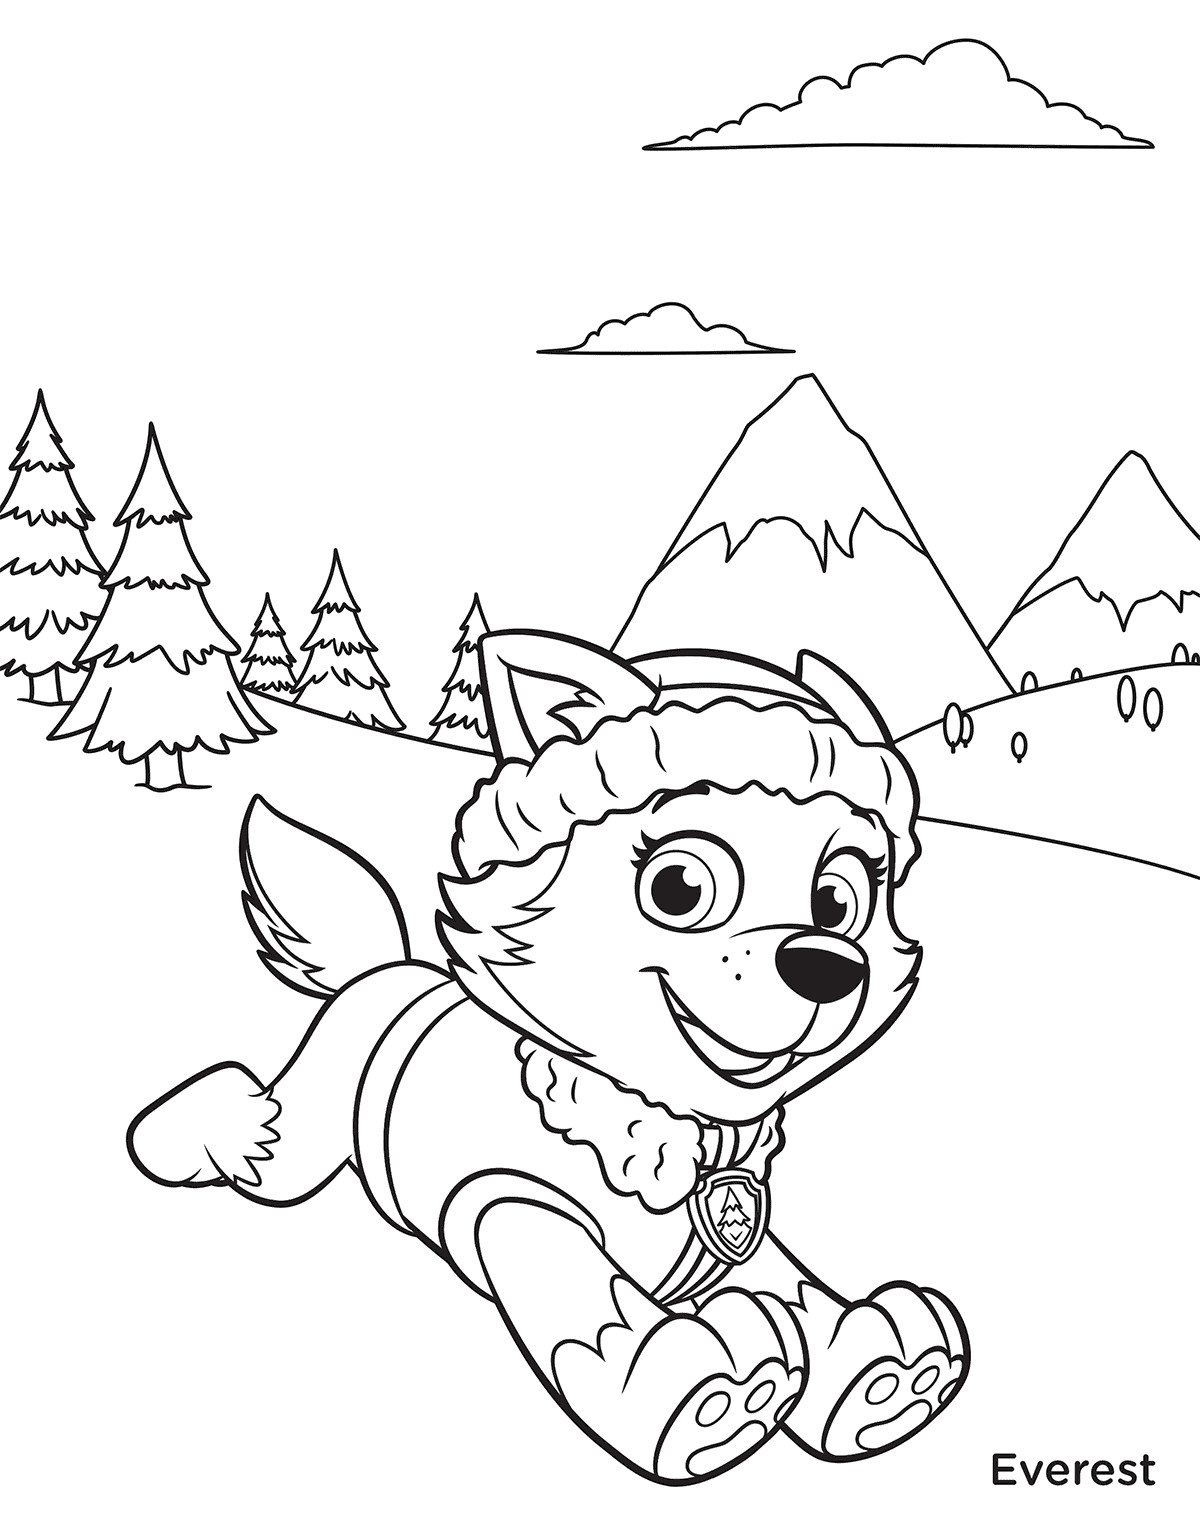 Paw Patrol Coloring Pages Everest
 Free Printable Paw Patrol Coloring Pages For Kids